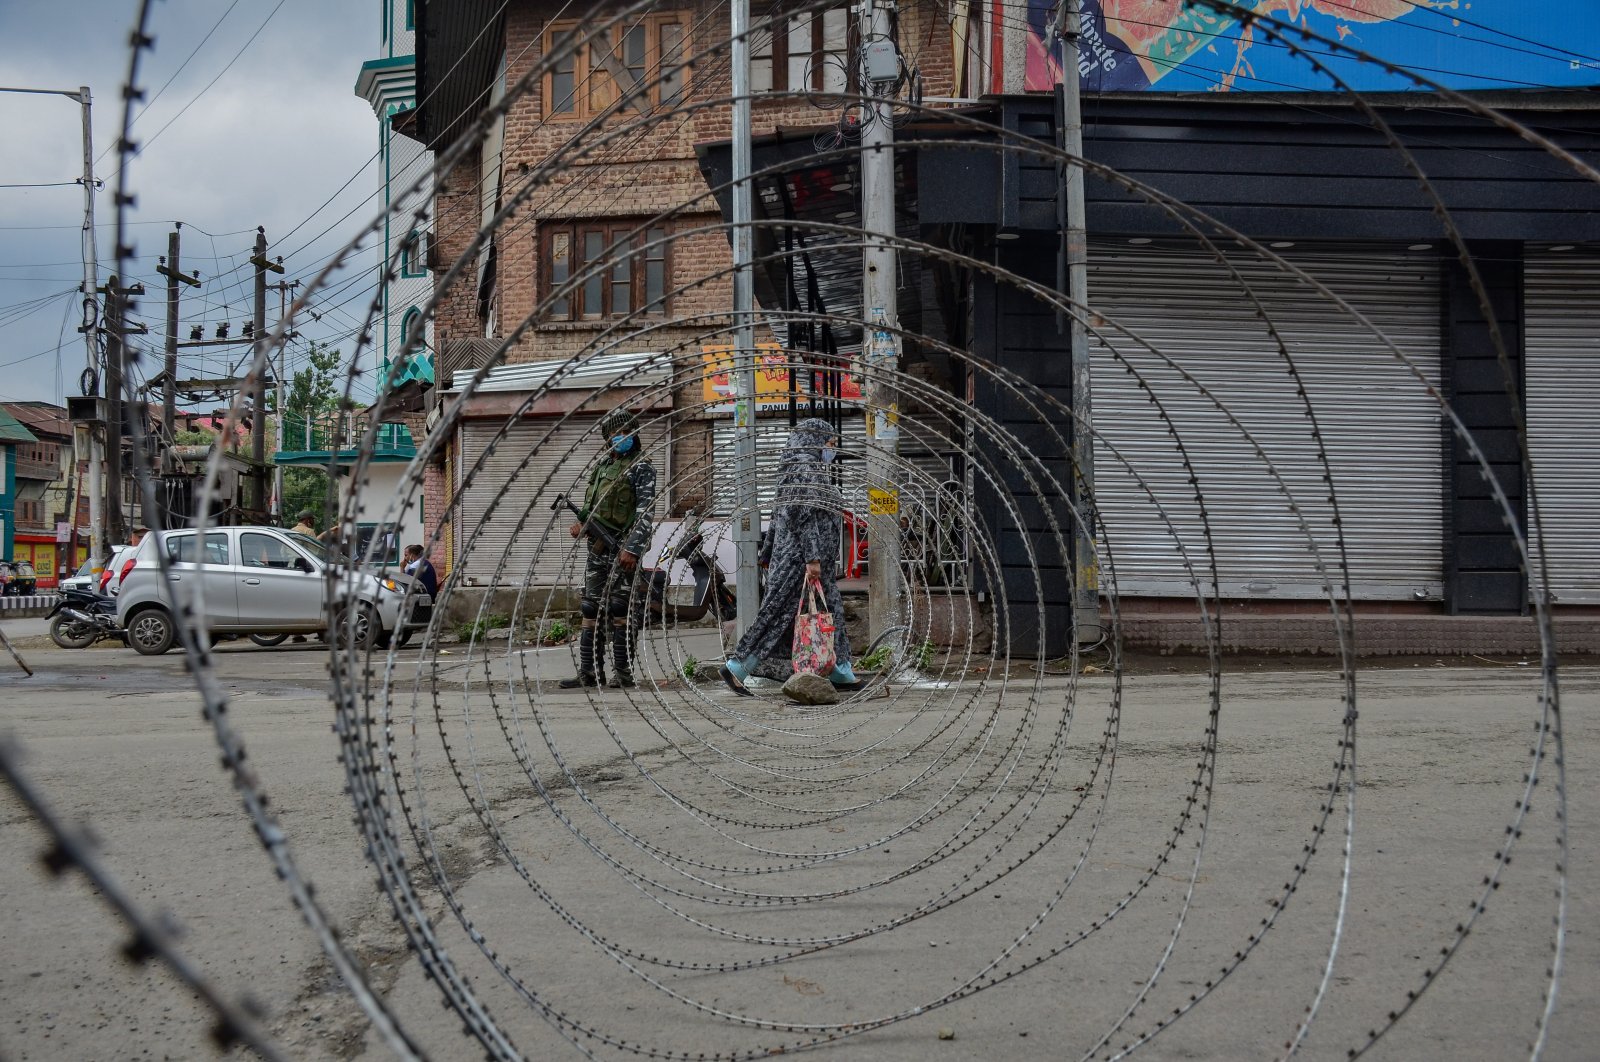 A woman walks past a barricade erected by Indian forces during restrictions imposed on the eve of Martyrs Day in the old city of Srinagar, Kashmir, July 13, 2021. (Photo by Getty Images)